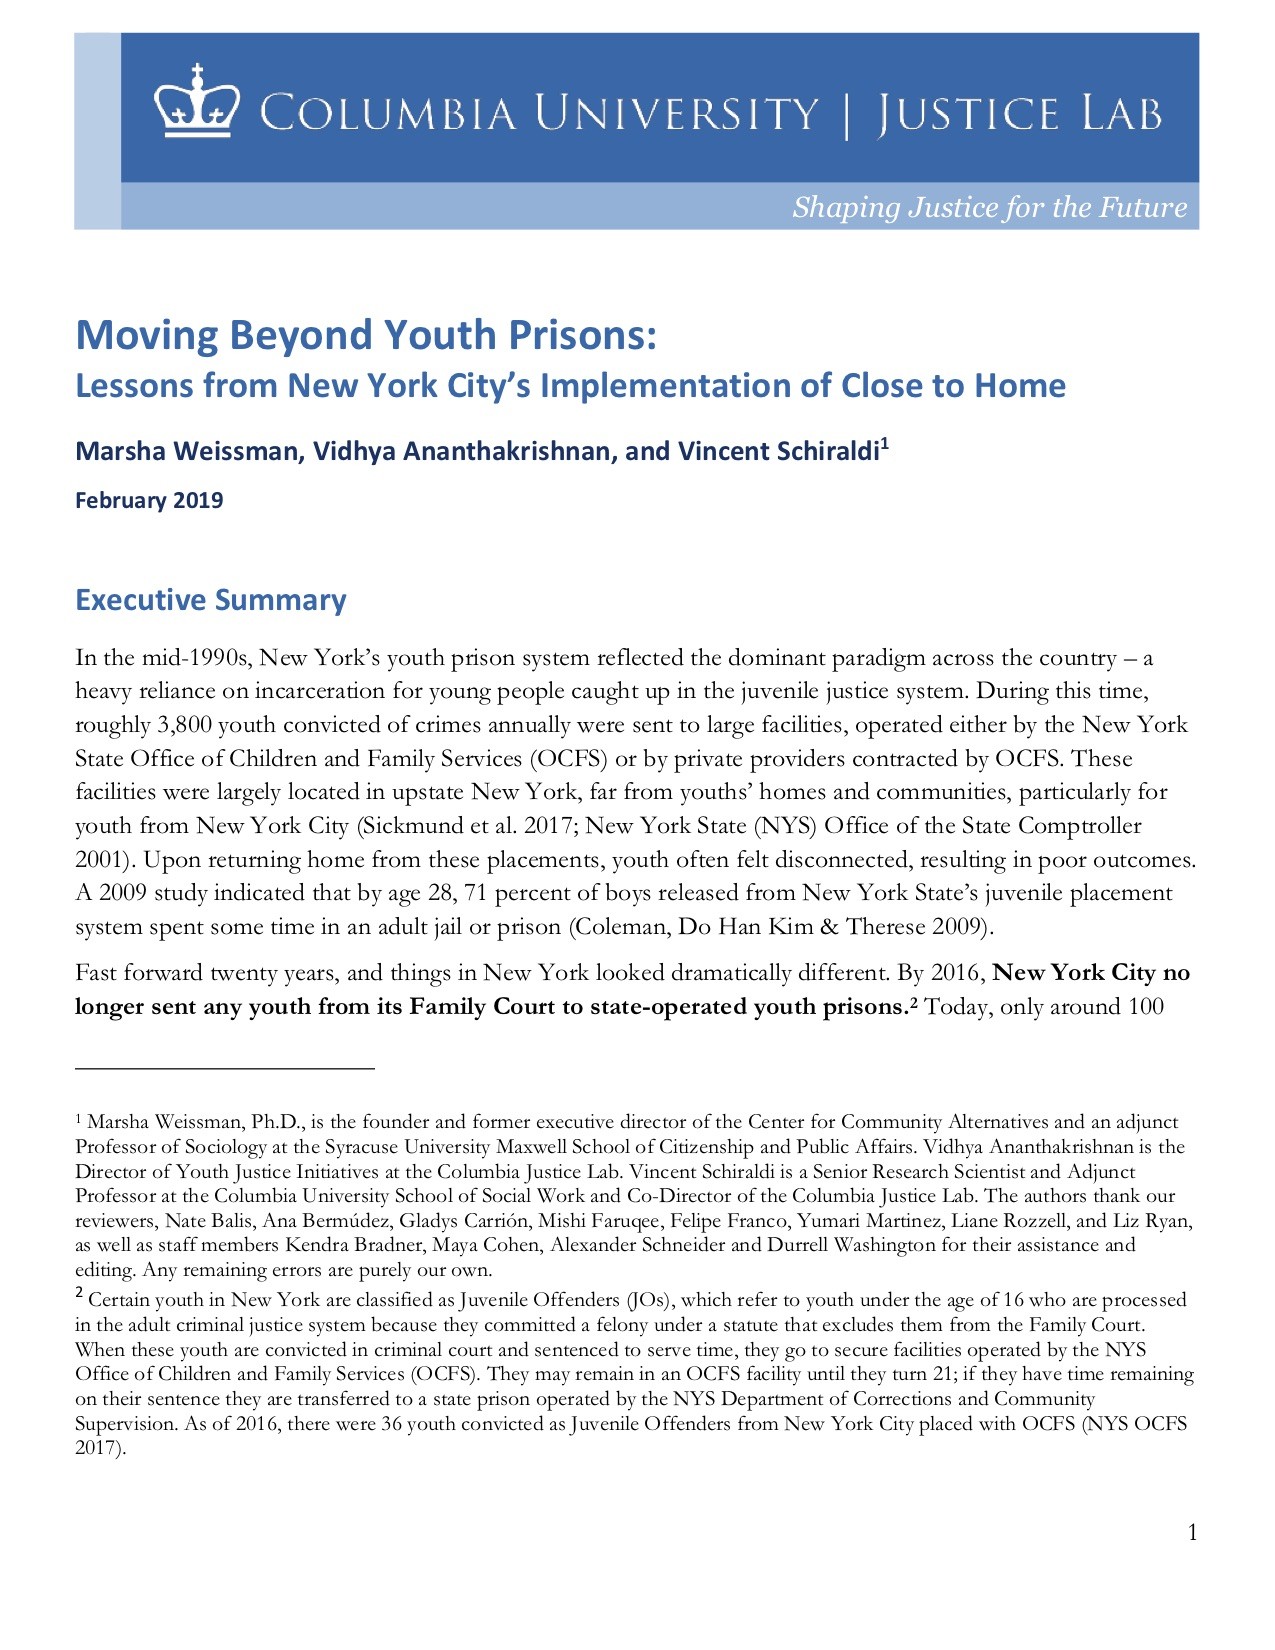 Moving Beyond Youth Prisons: Executive Summary